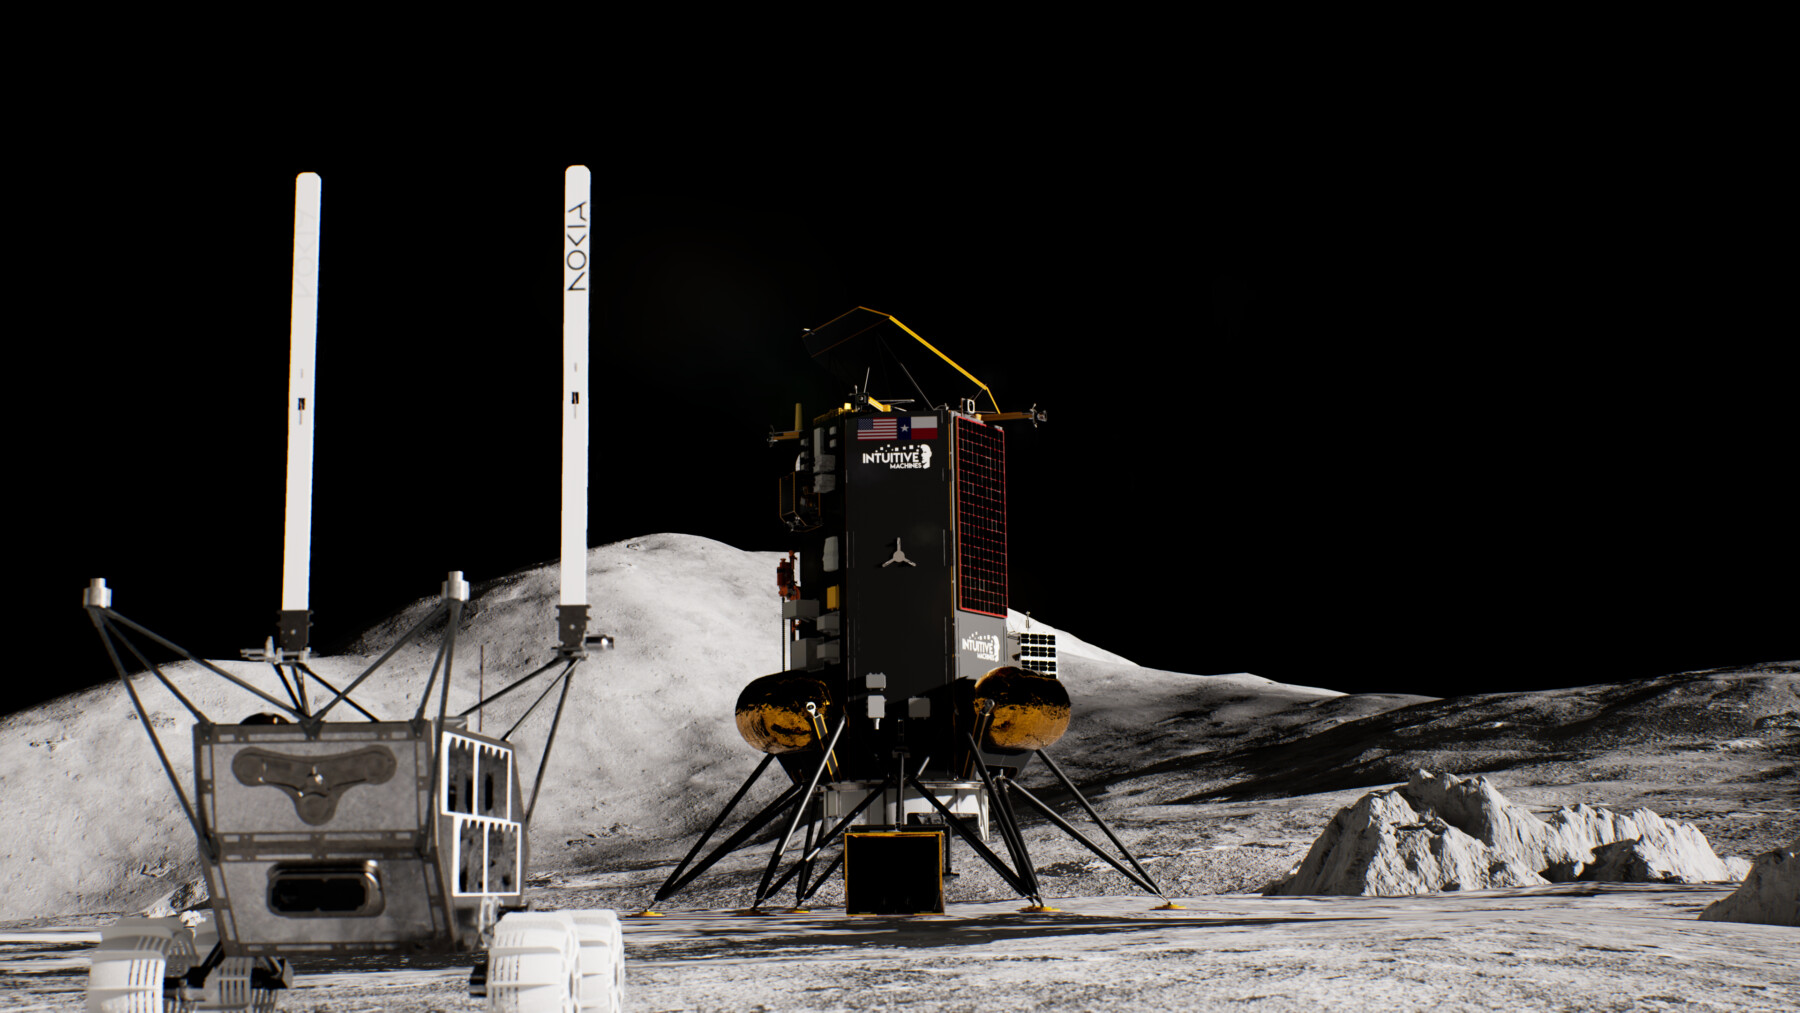 A small robotic vehicle moves away from a spacecraft on a grey rocky surface in front of a black sky.